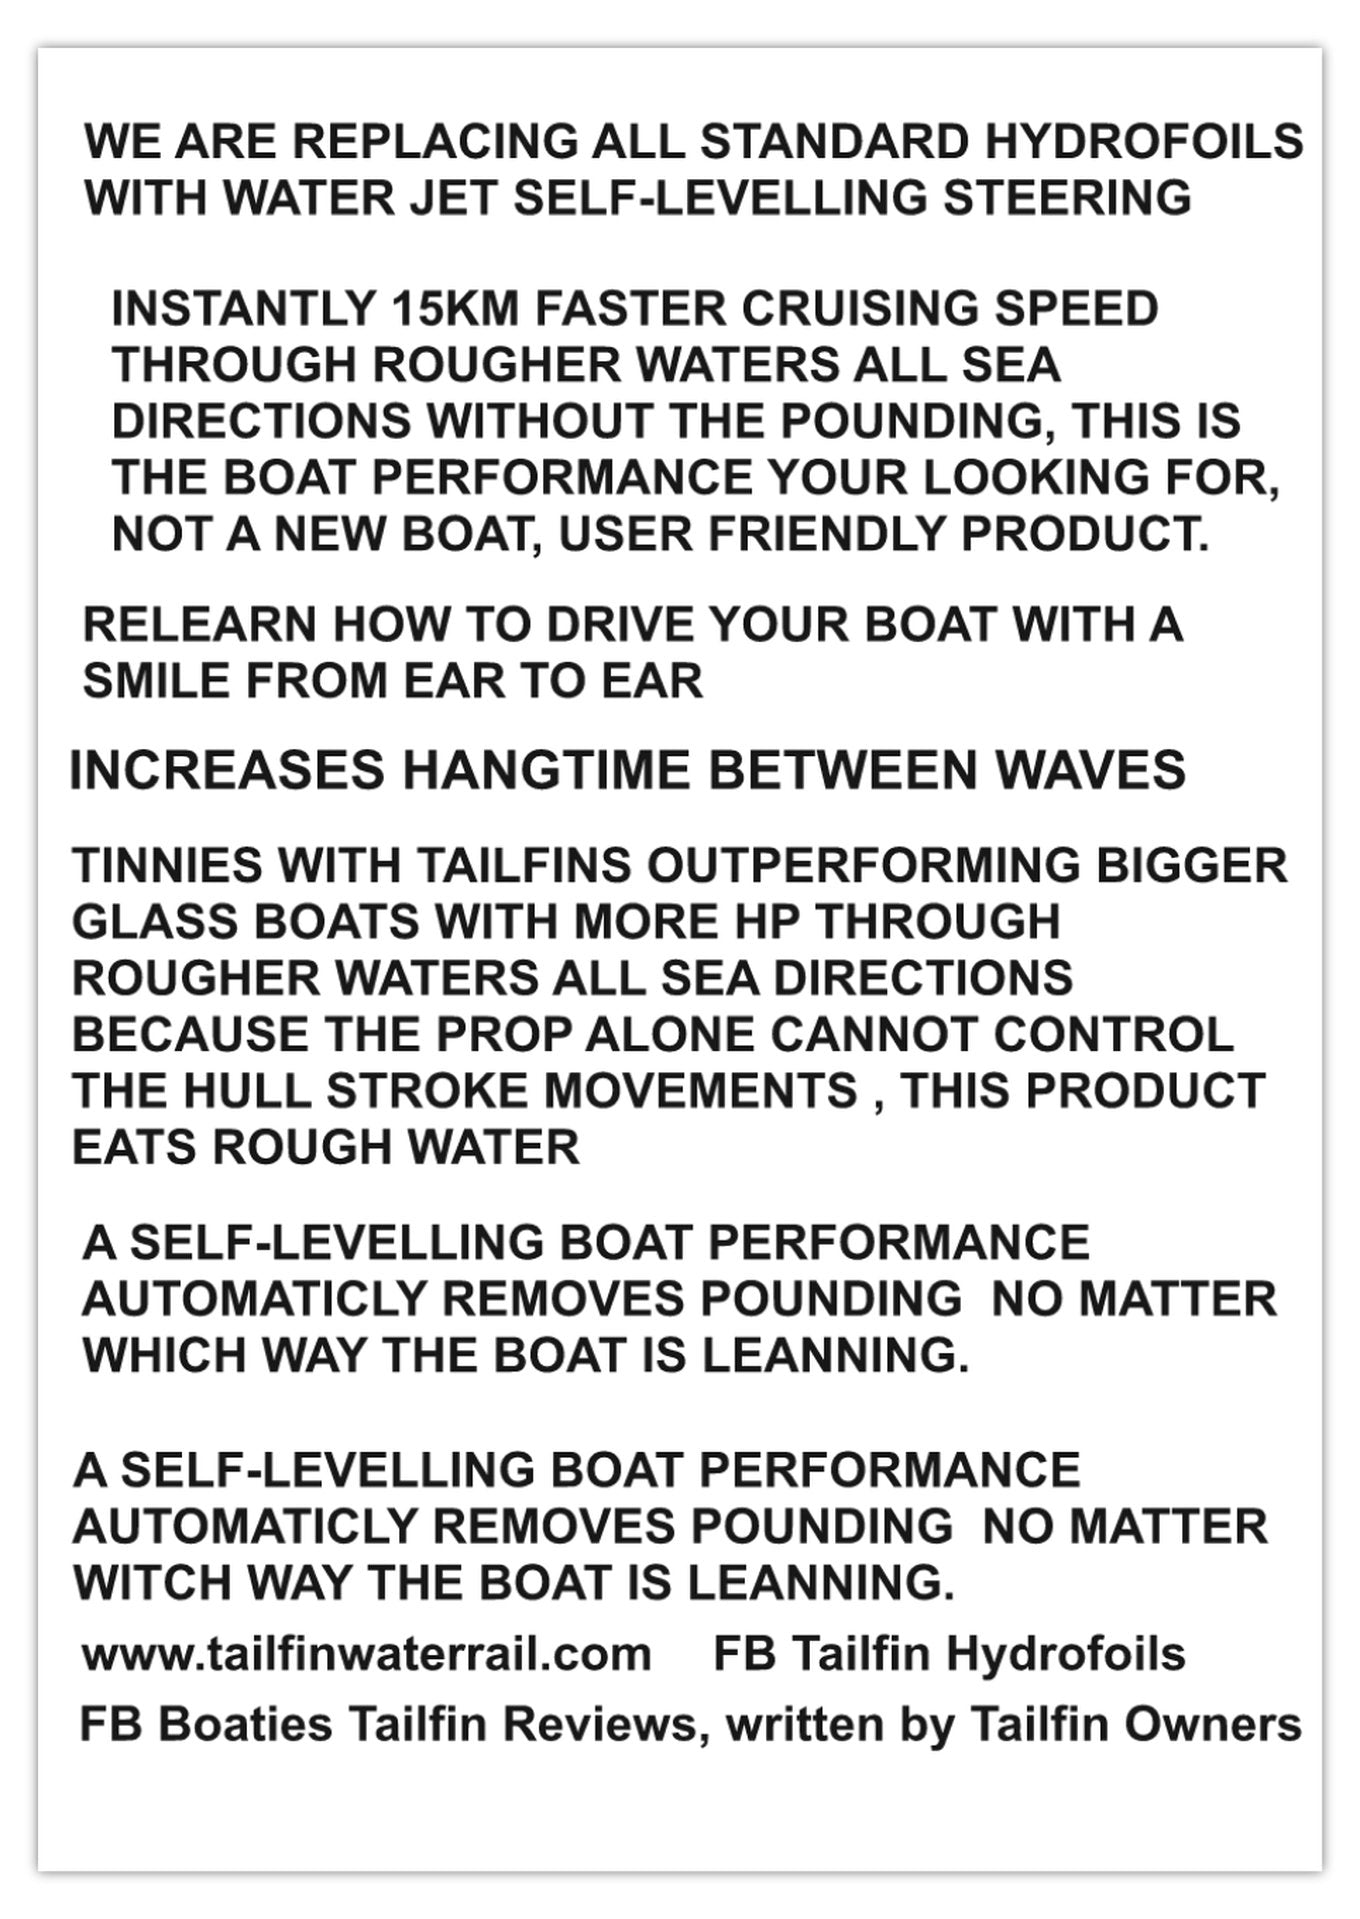 CLICK TO BUY HERE, WE ARE REPLACING ALL STANDARD HYDROFOILS WITH WATER JET SELF-LEVELLING STEERING